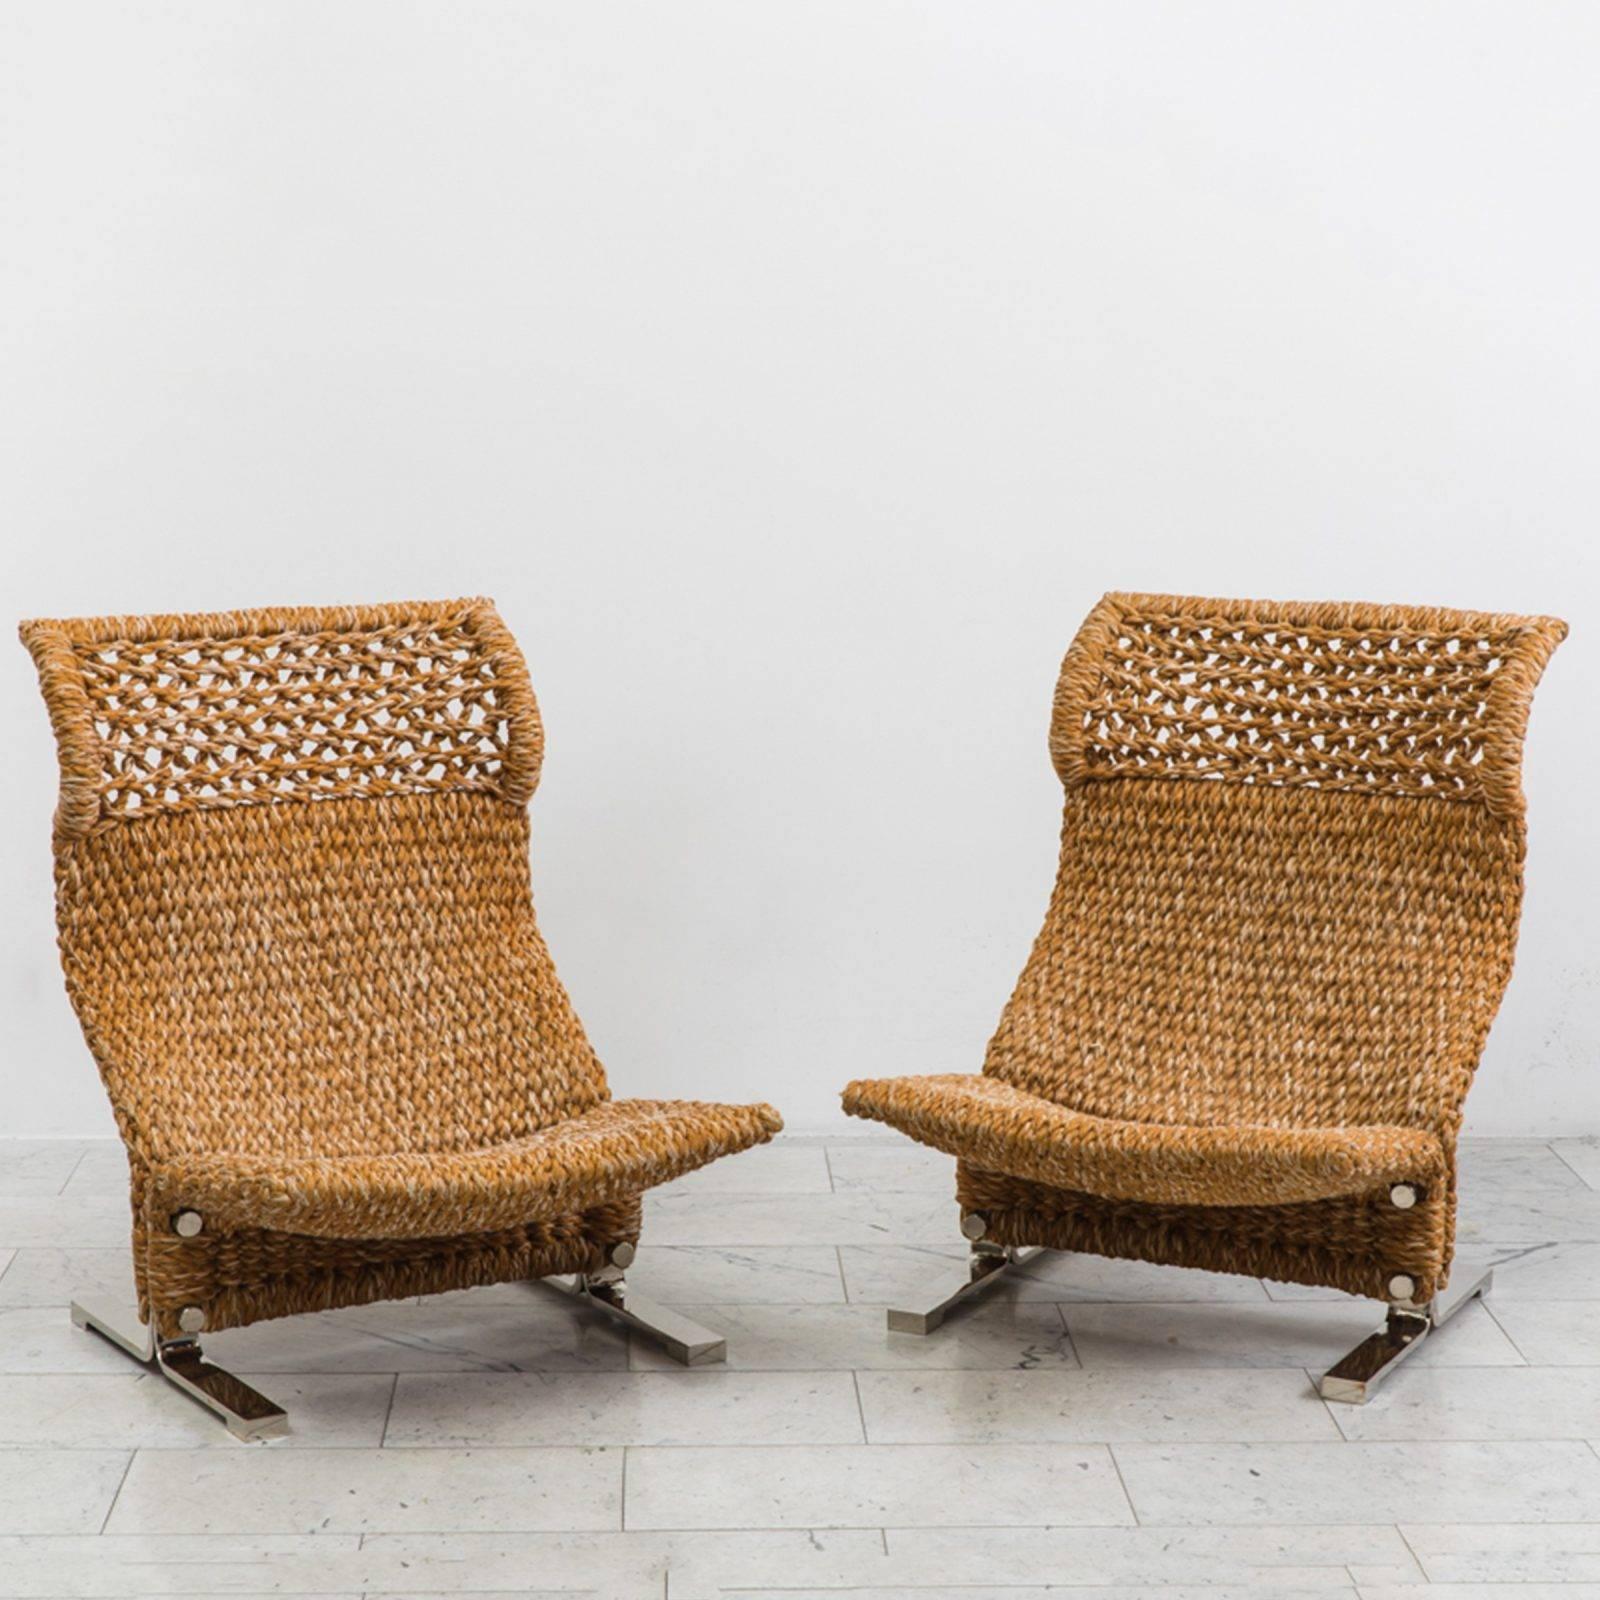 Marzio Cecchi, Pair of Low Knitted Lounge Chairs, IT, c. 1970s